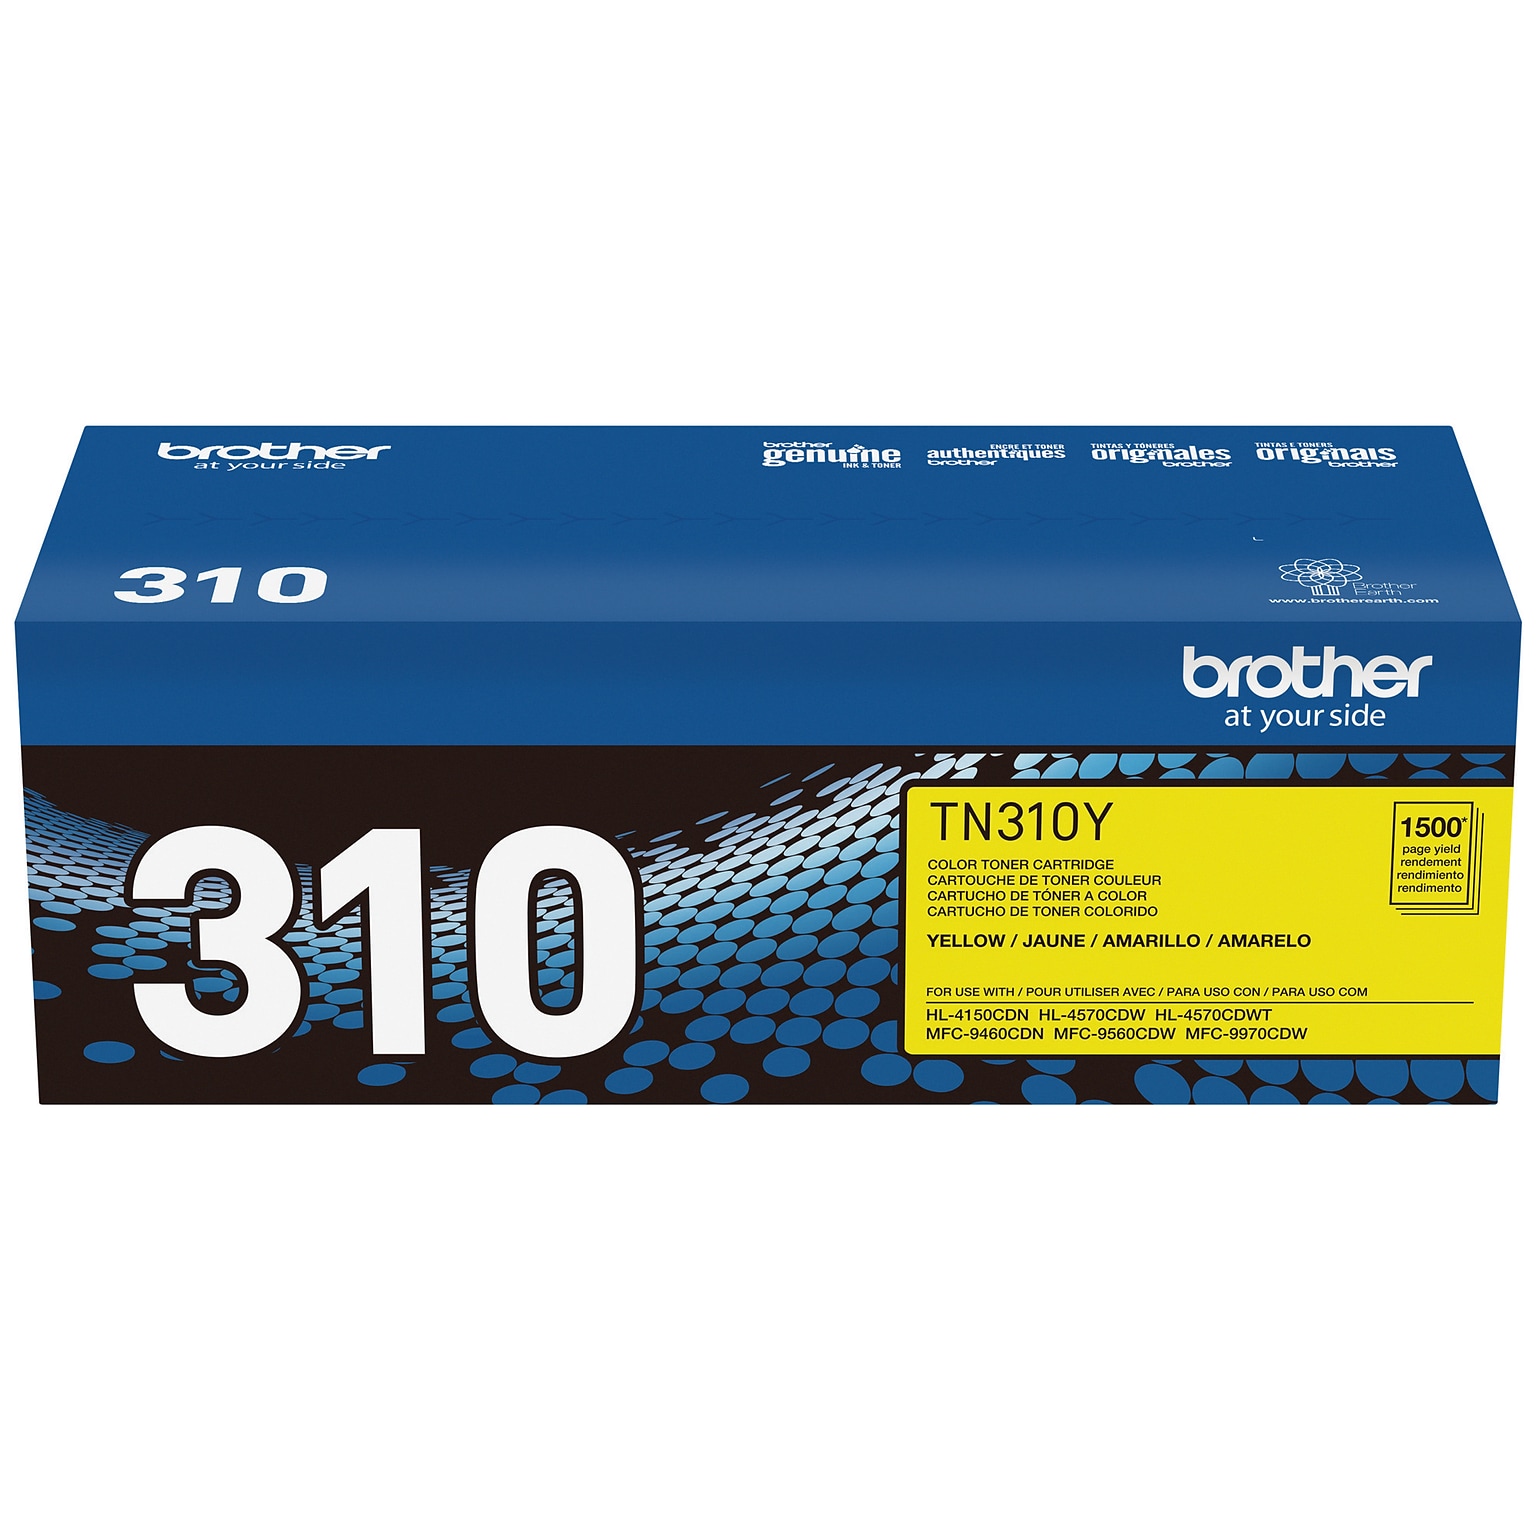 Brother TN-310 Yellow Standard Yield Toner Cartridge, Print Up to 1,500 Pages (TN310Y)